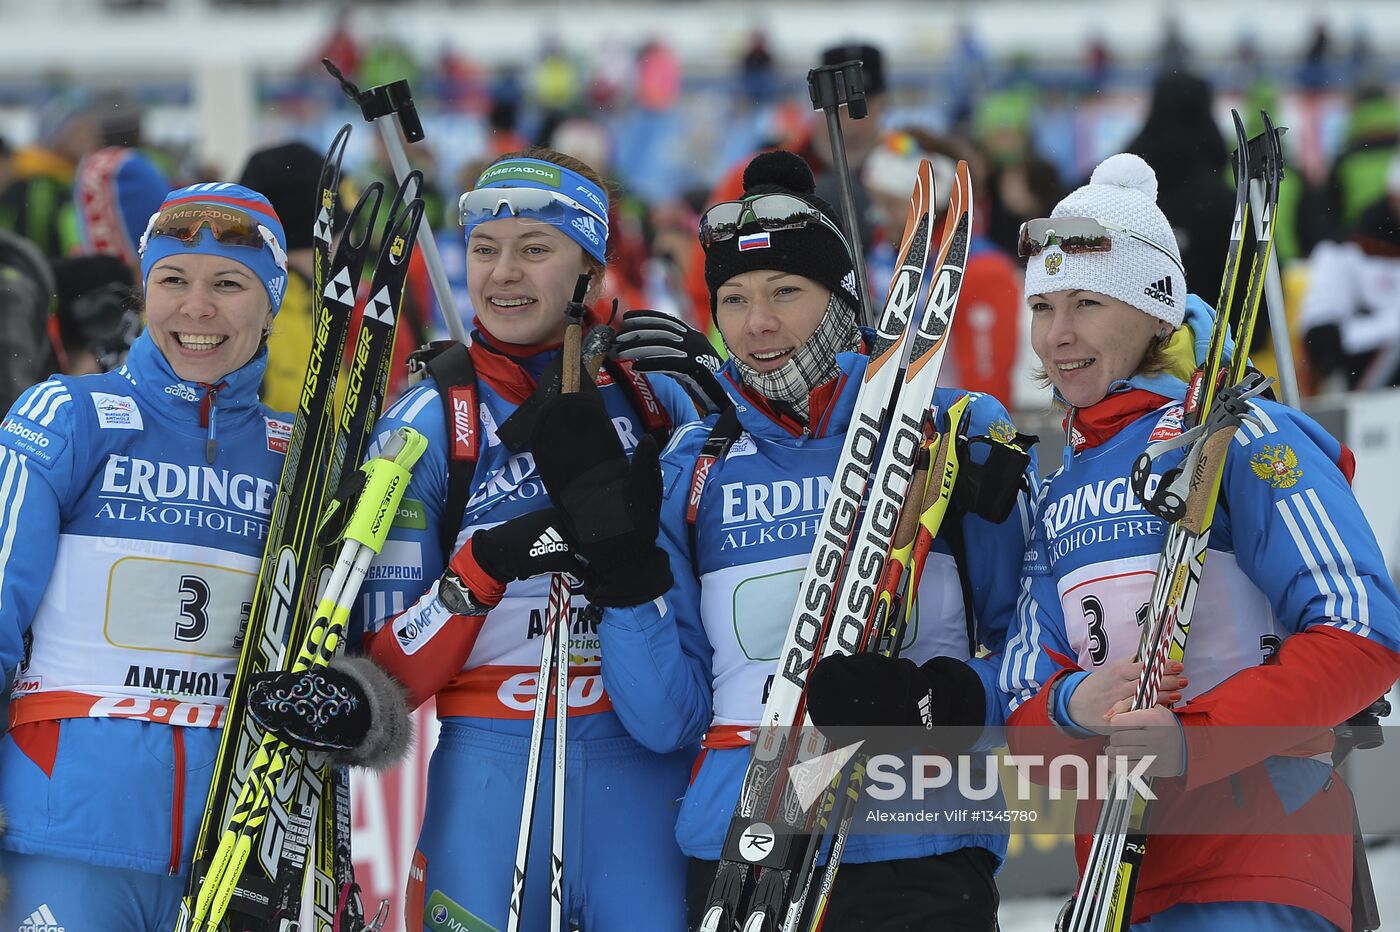 Biathlon 6th stage of World Cup. Women's Relay